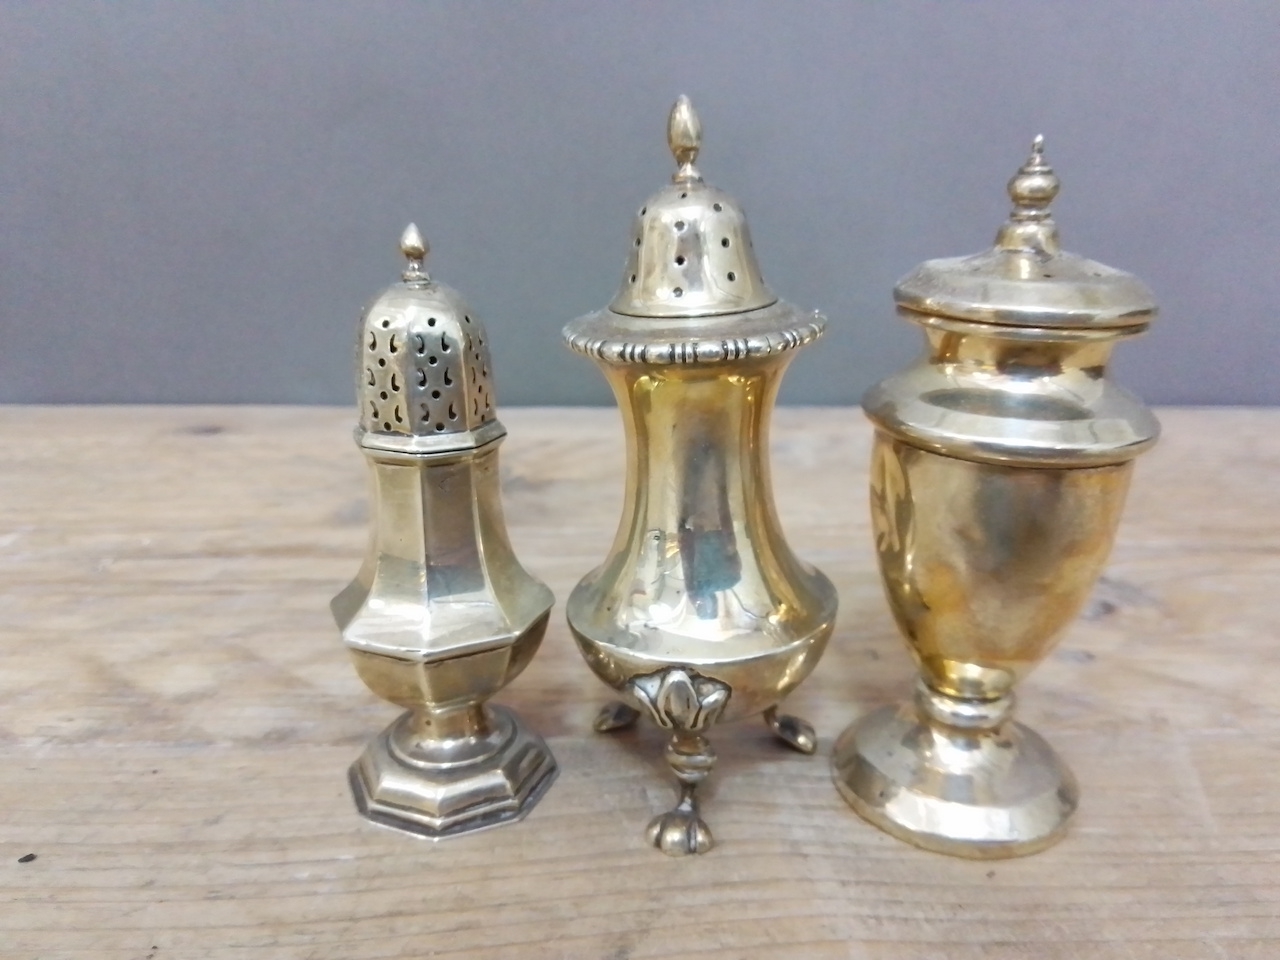 A group of three hallmarked silver pepper pots, various dates and makers, wt. 4ozt.